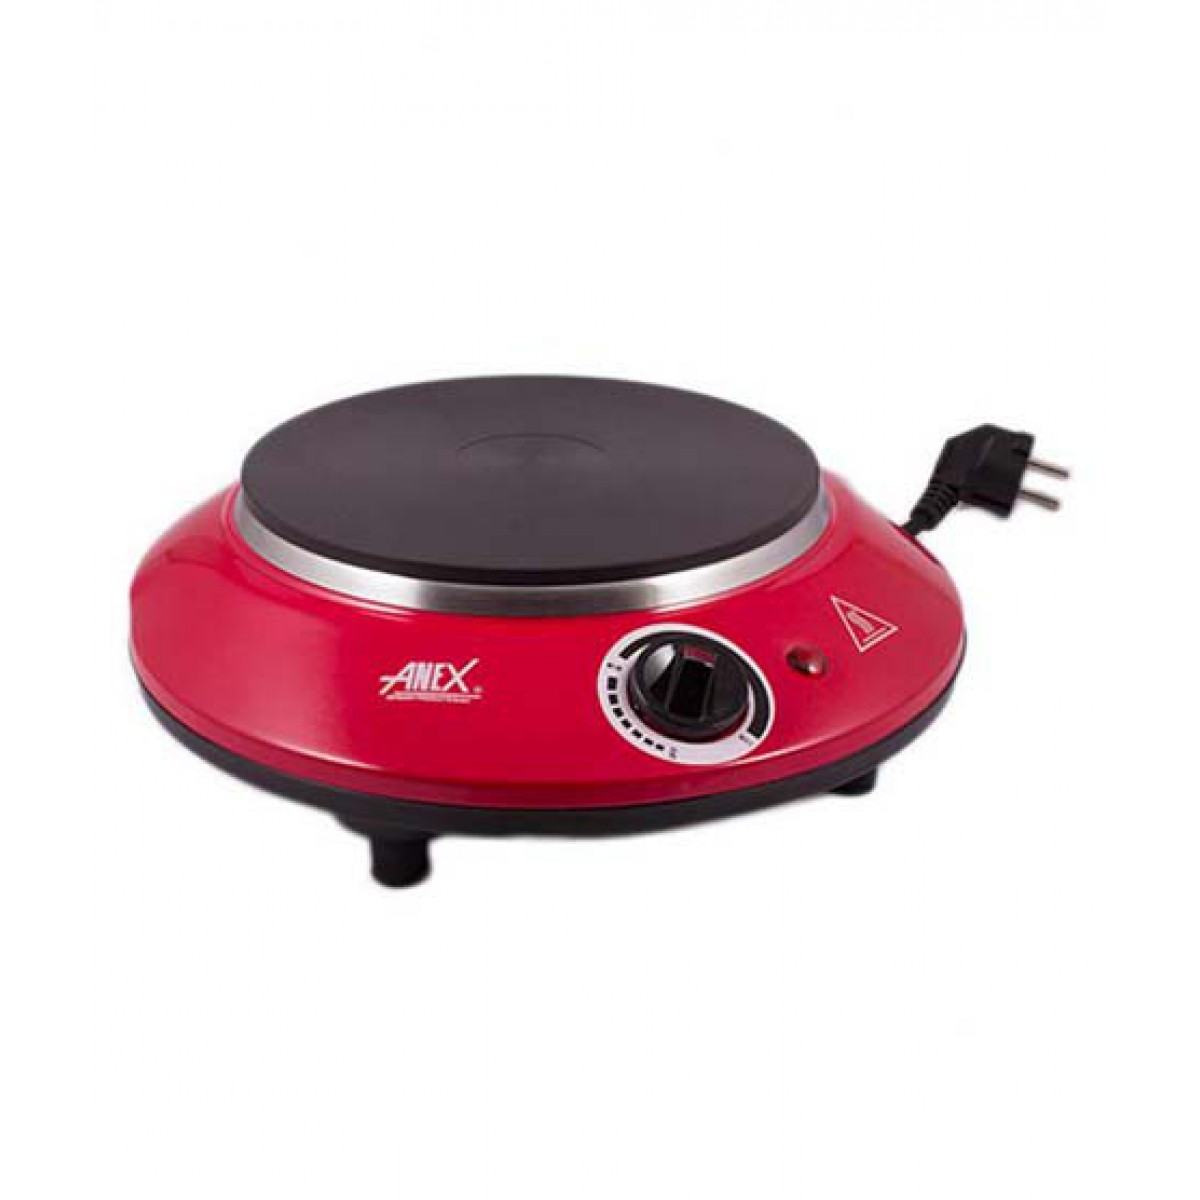 Anex Hot Plate Price In Pakistan 2019